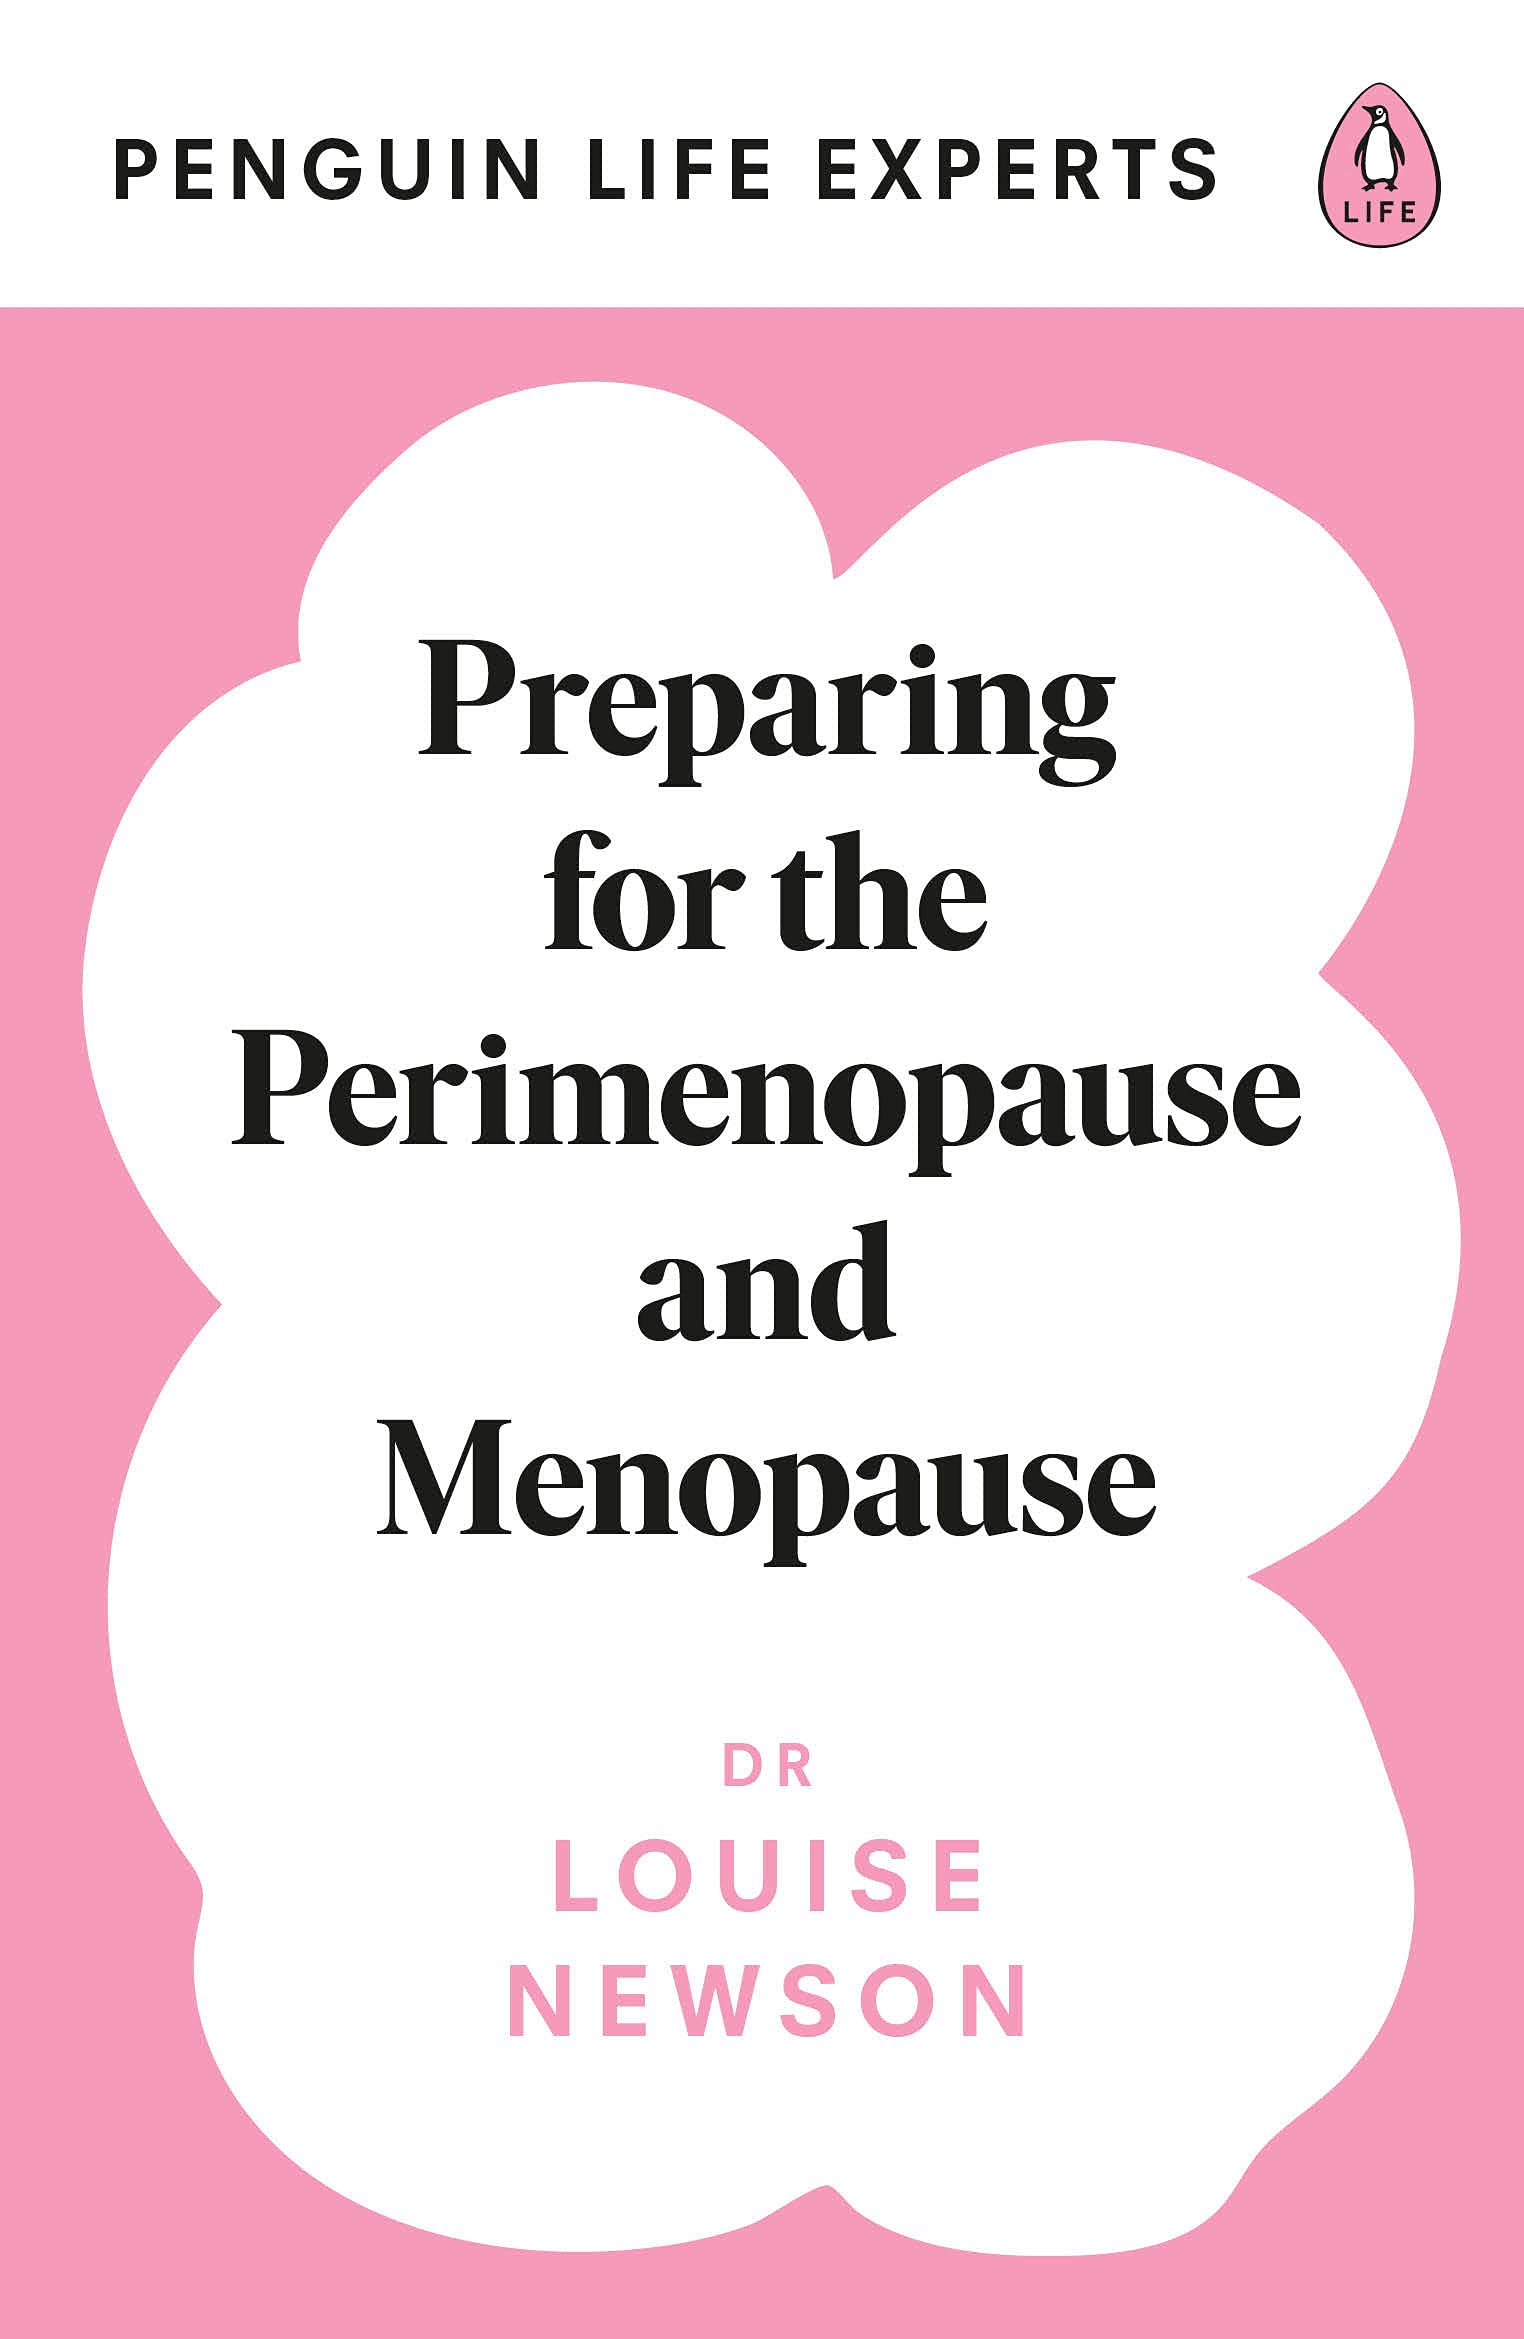 Preparing for the Perimenopause and Menopause | Dr. Louise Newson